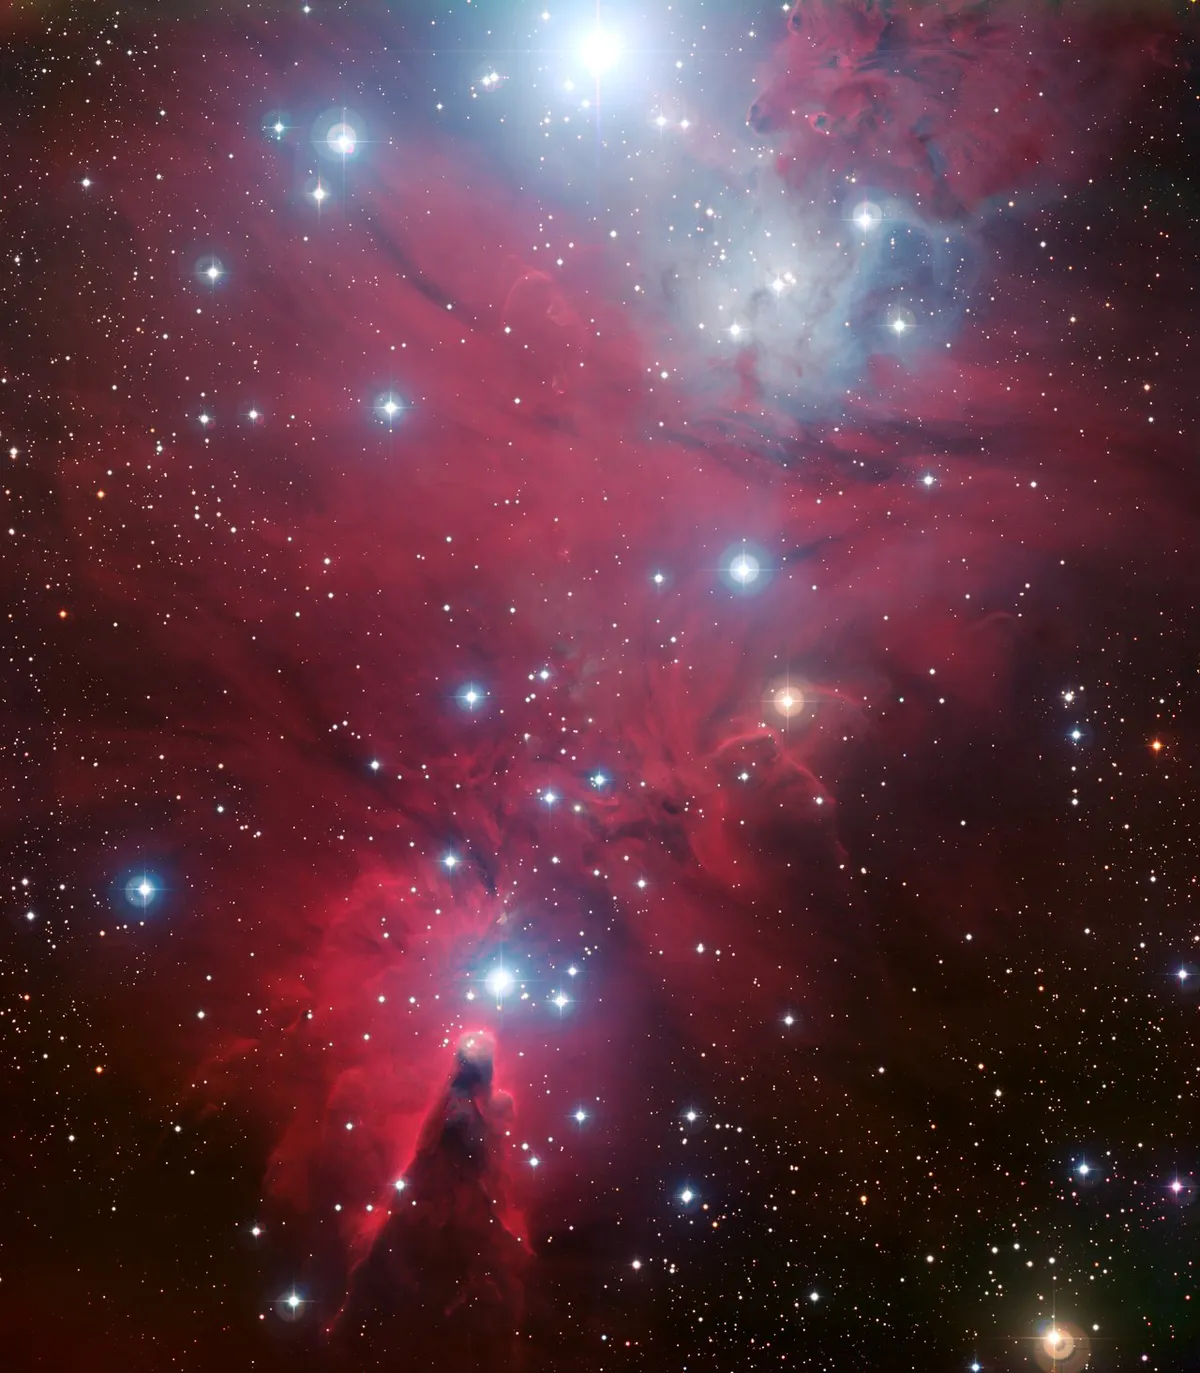 The most appropriately named of all winter star clusters! The Christmas Tree Cluster. Credit: ESO